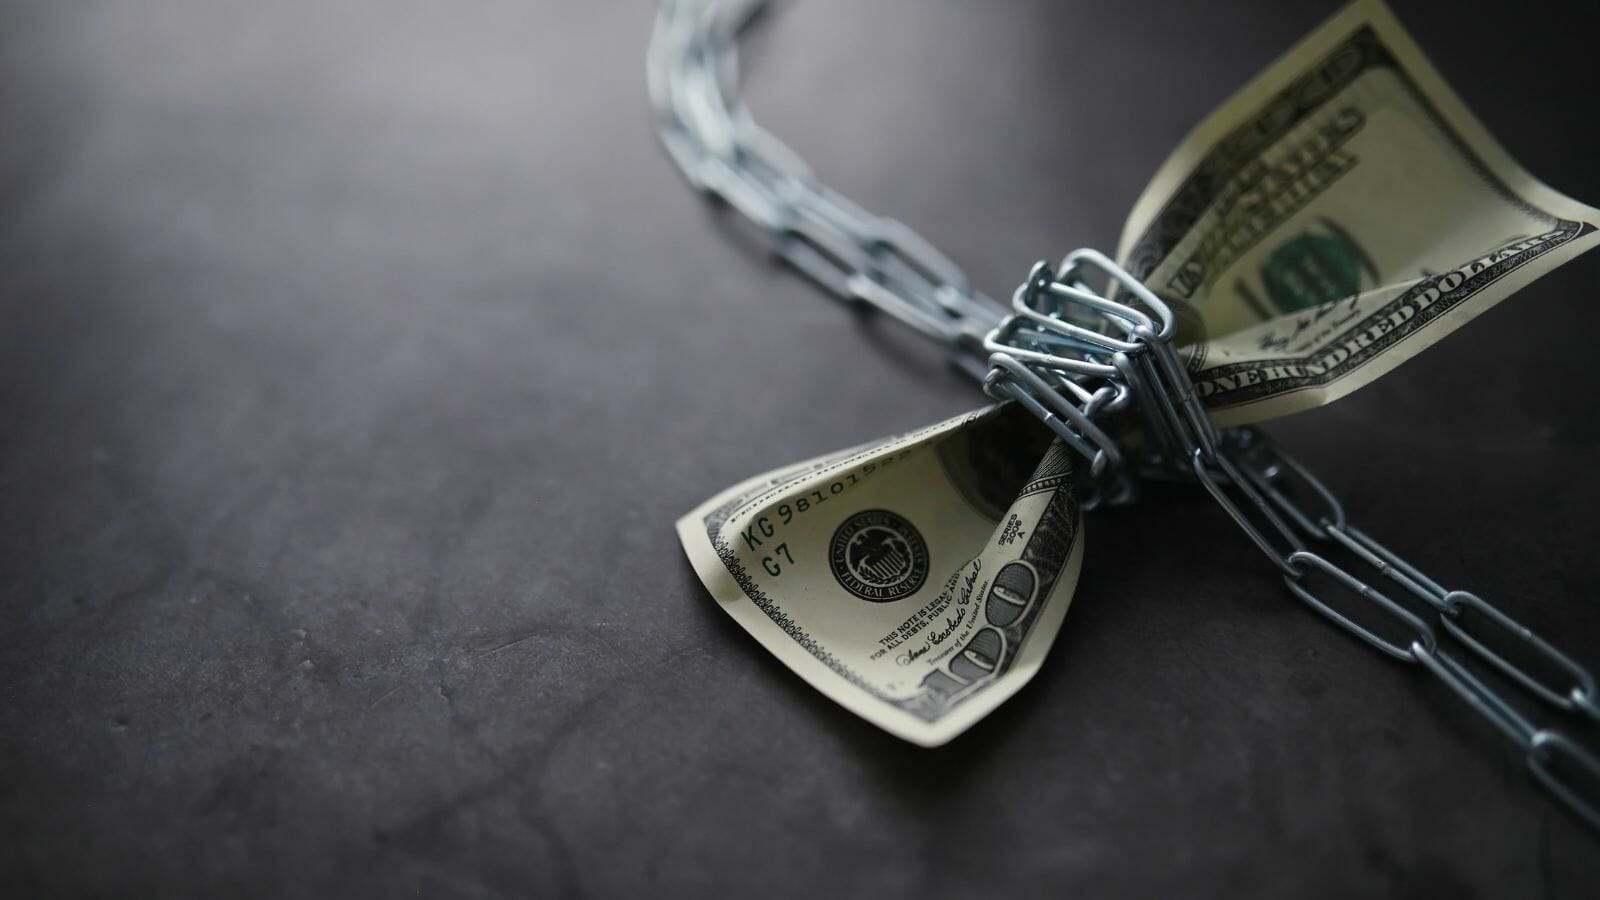 A dollar bill tied to a chain

